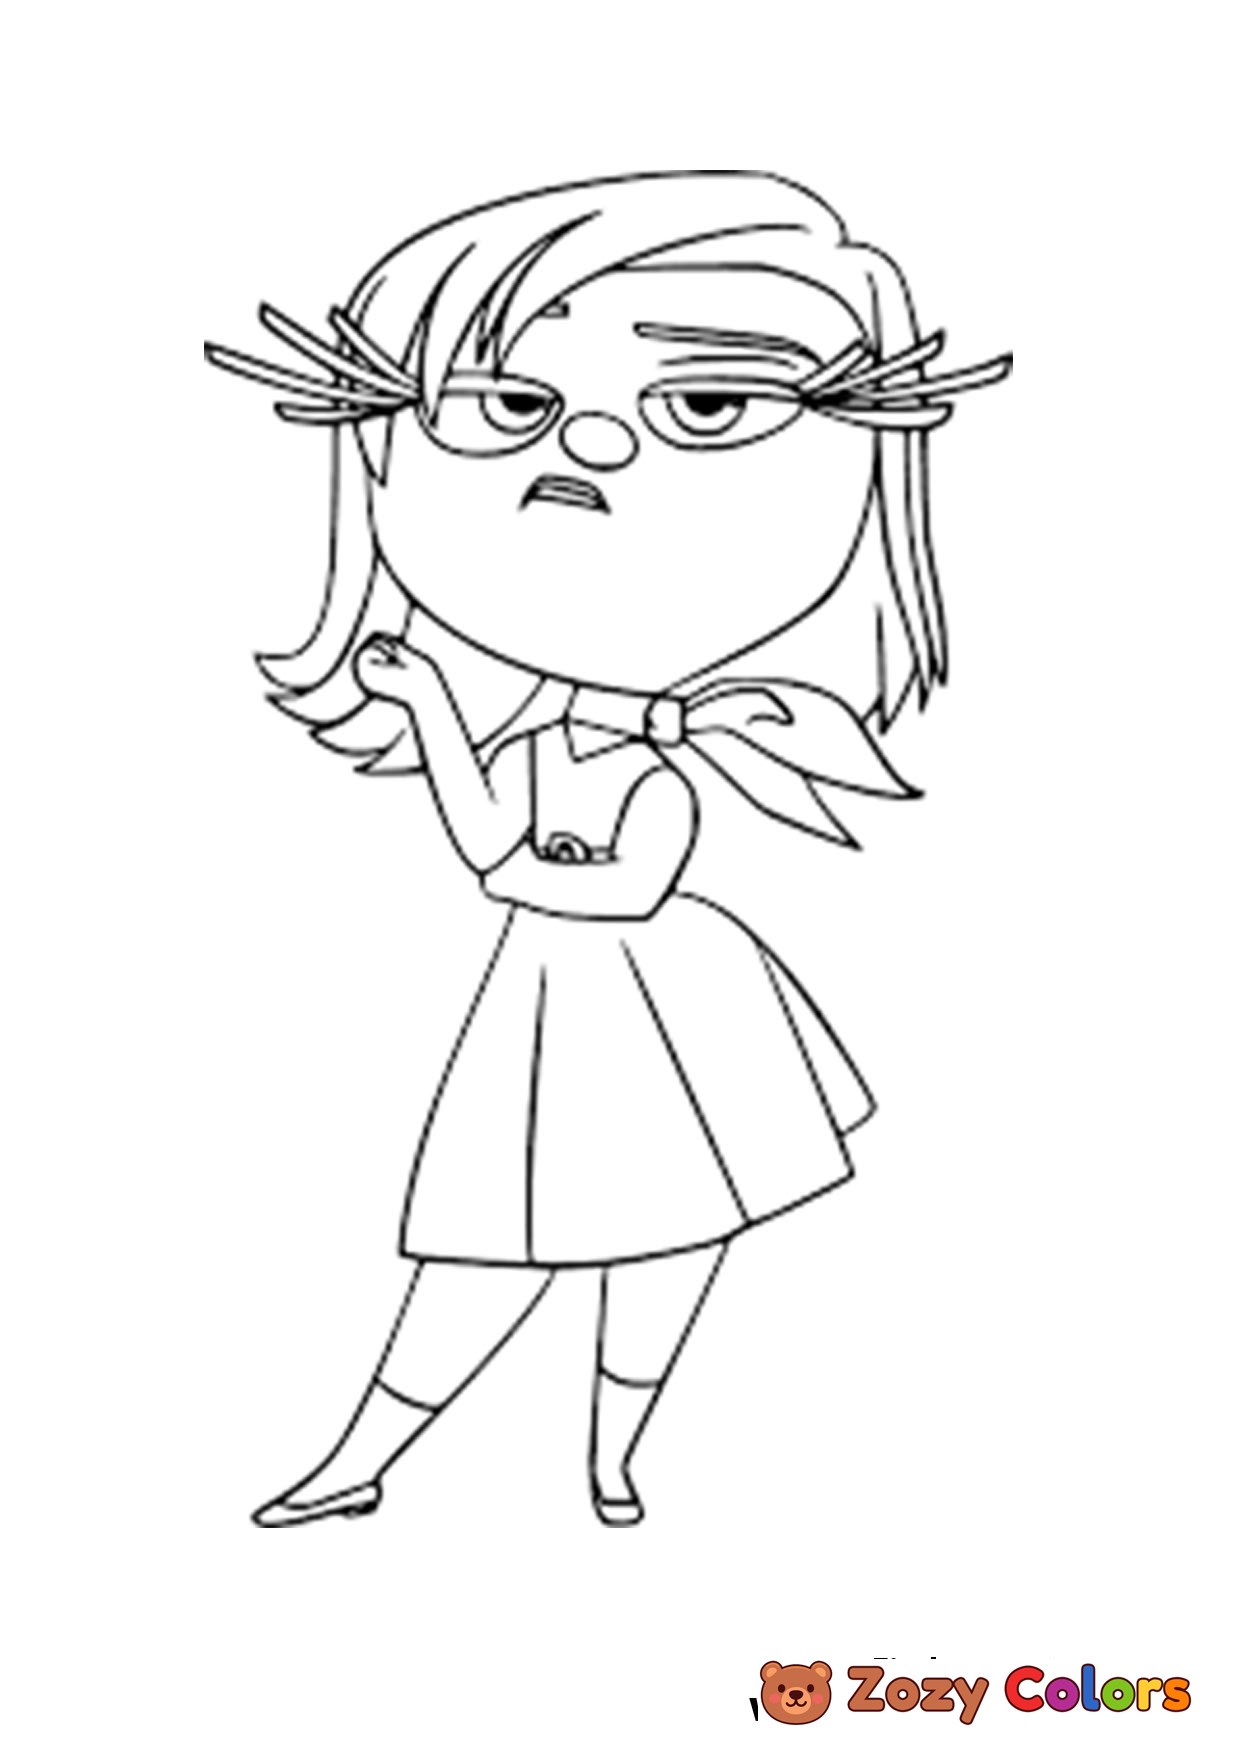 Free Inside Out Disgust coloring page